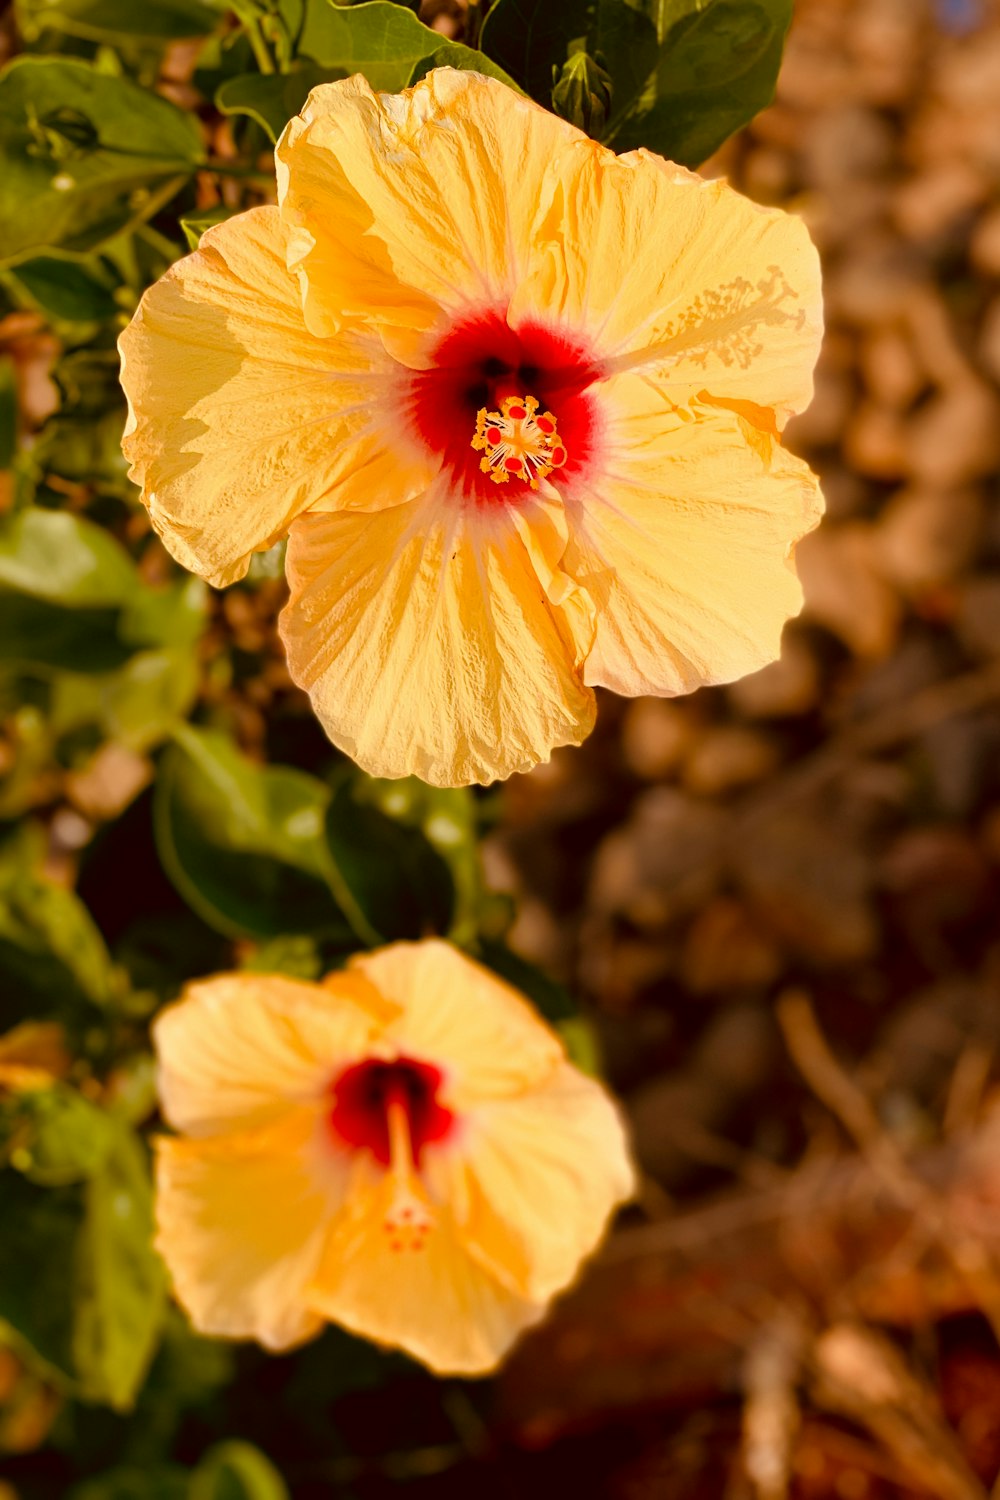 two yellow flowers with a red center in a garden